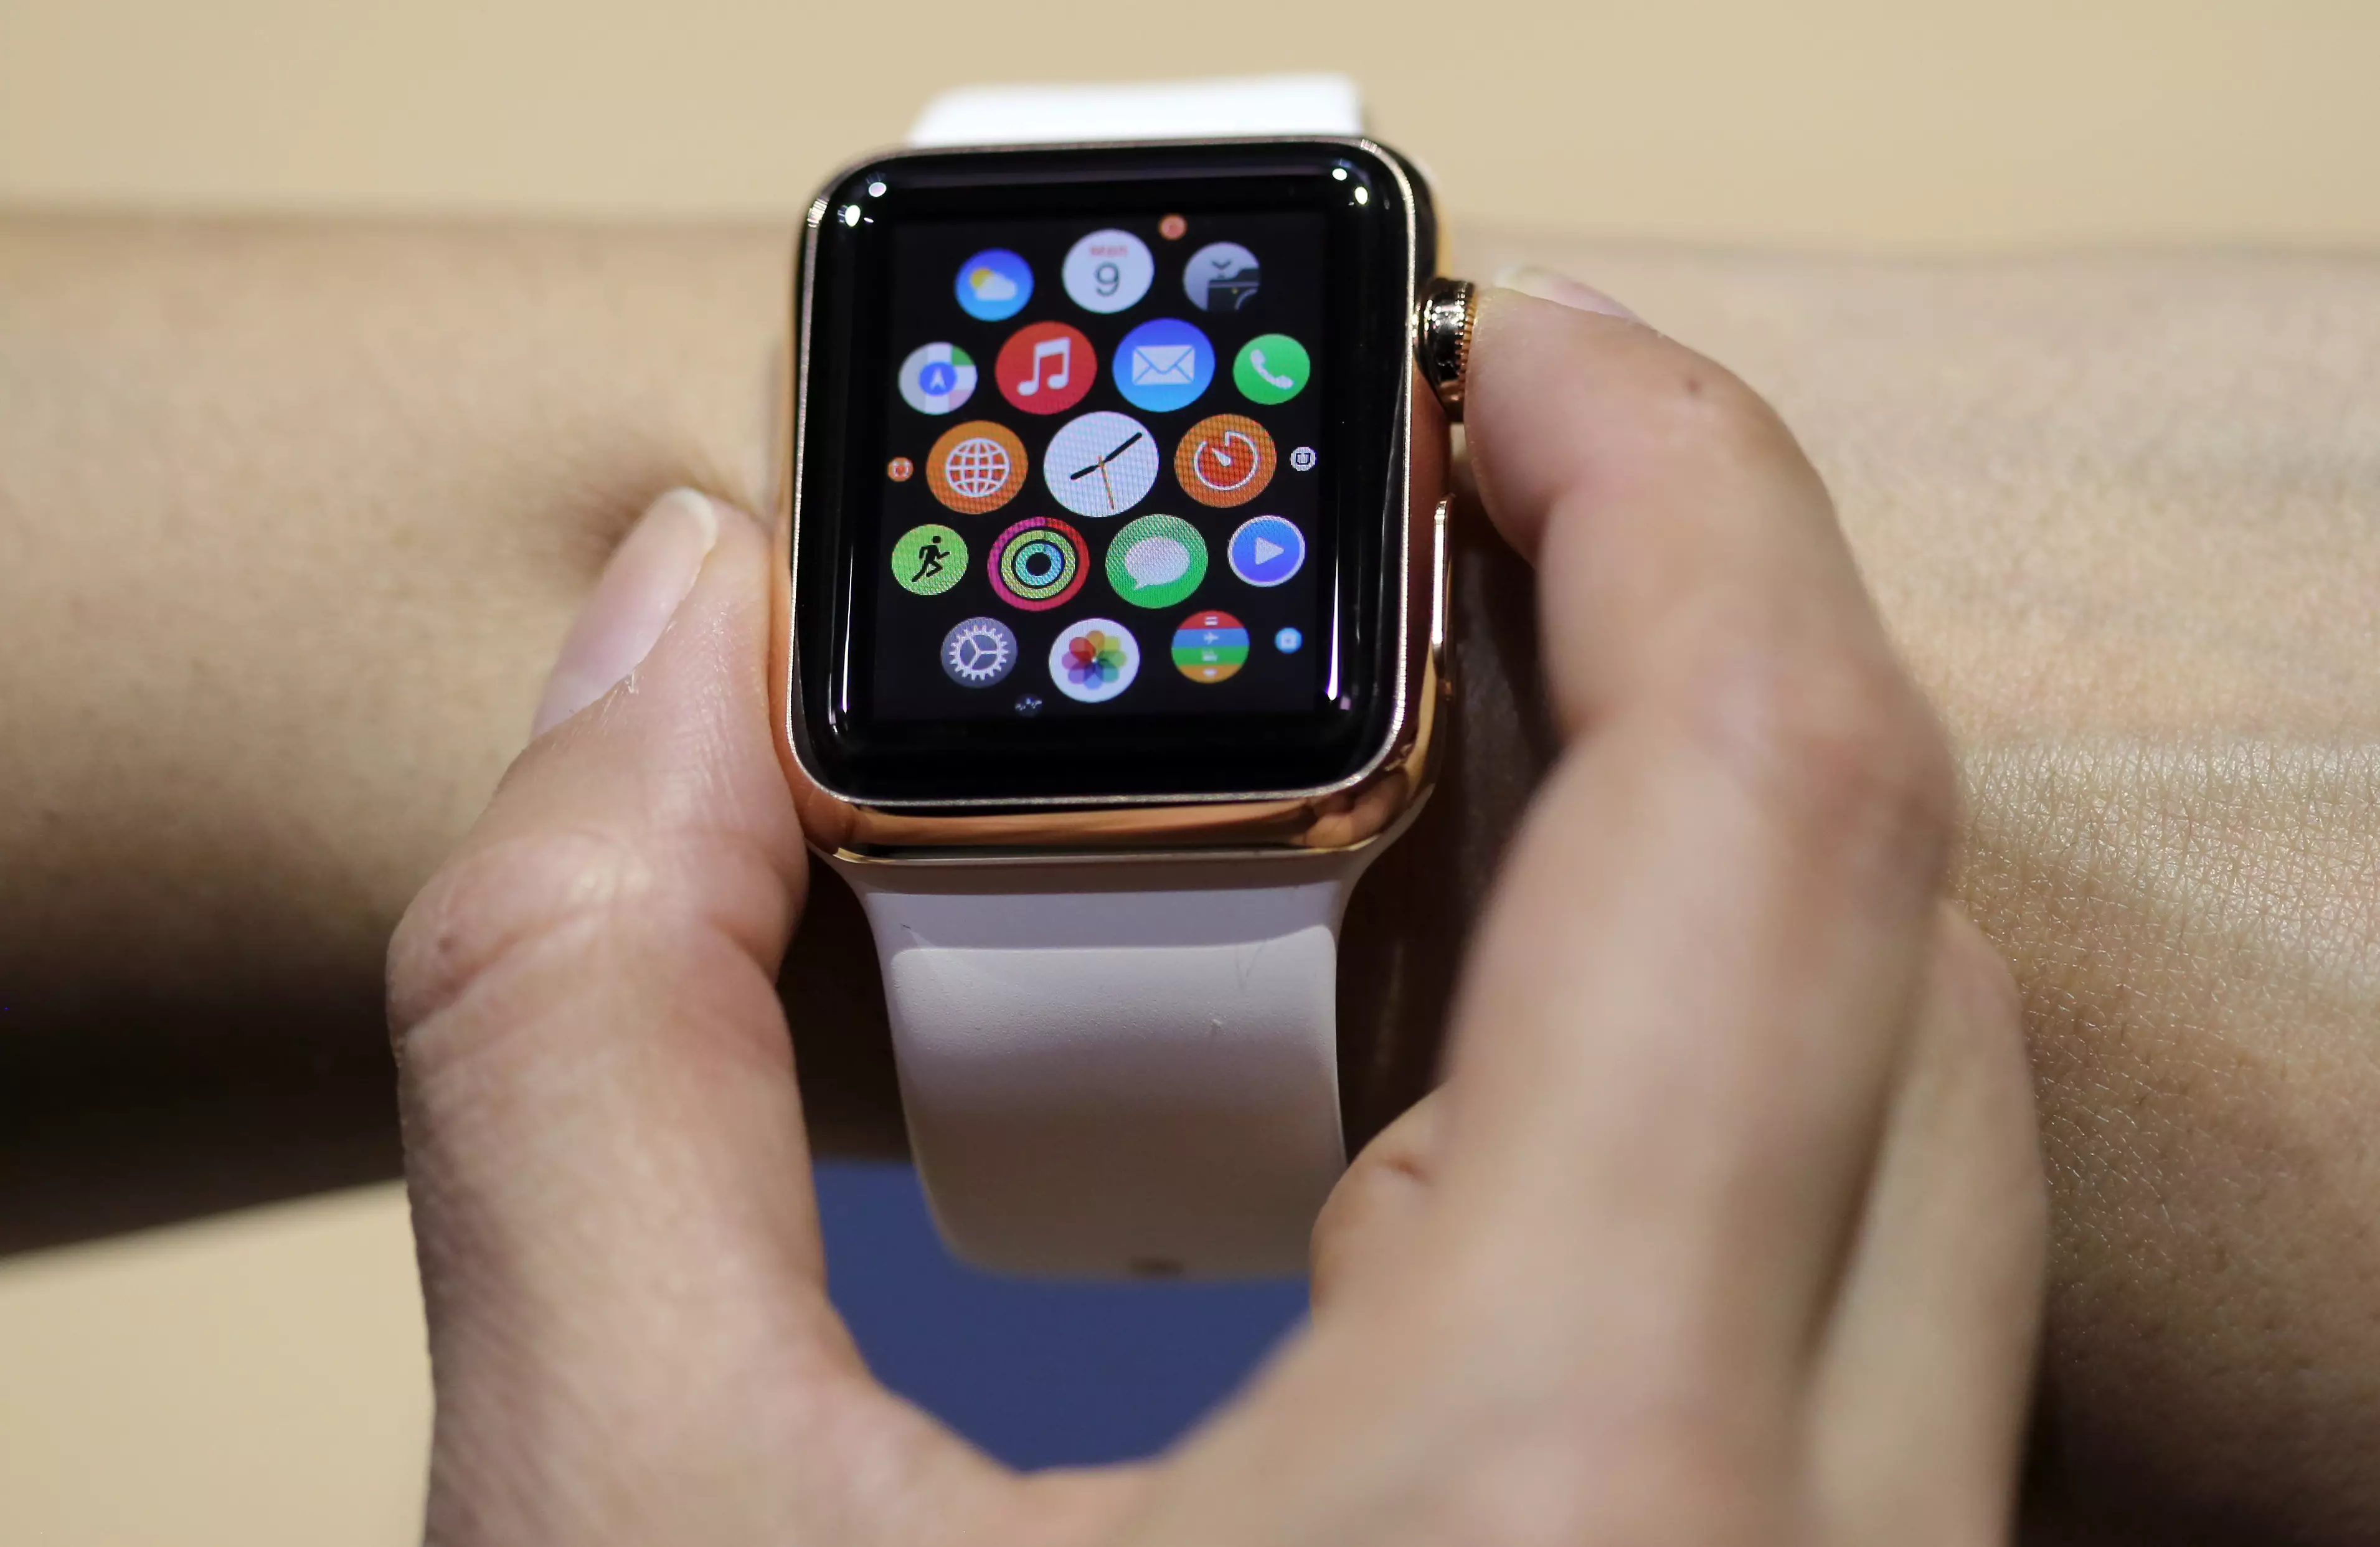 Hackers will be looking for flaws in a variety of devices including the Apple Watch.